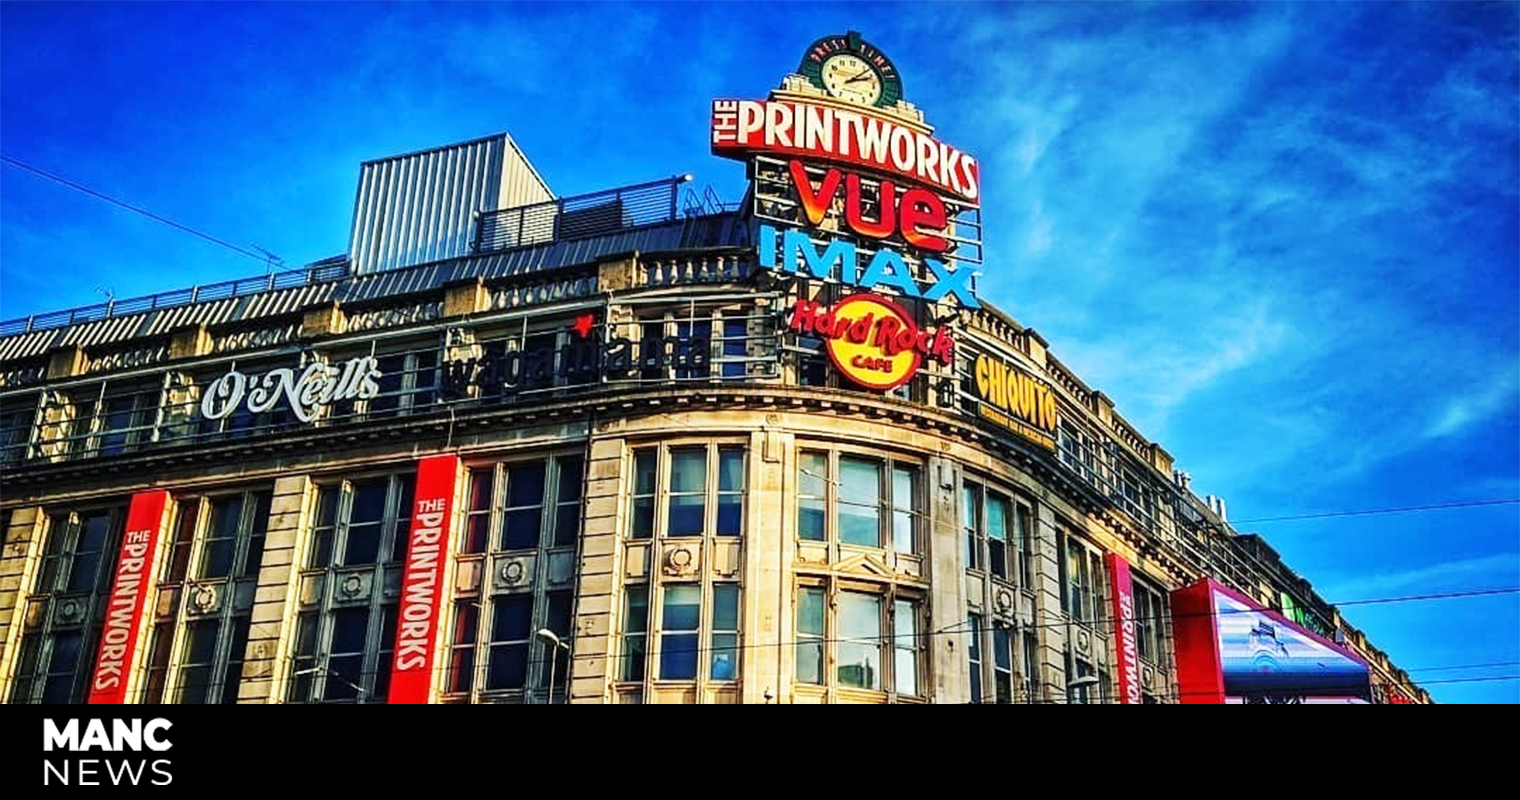 Printworks is serving free hot food and drinks to vulnerable people across the city today, The Manc